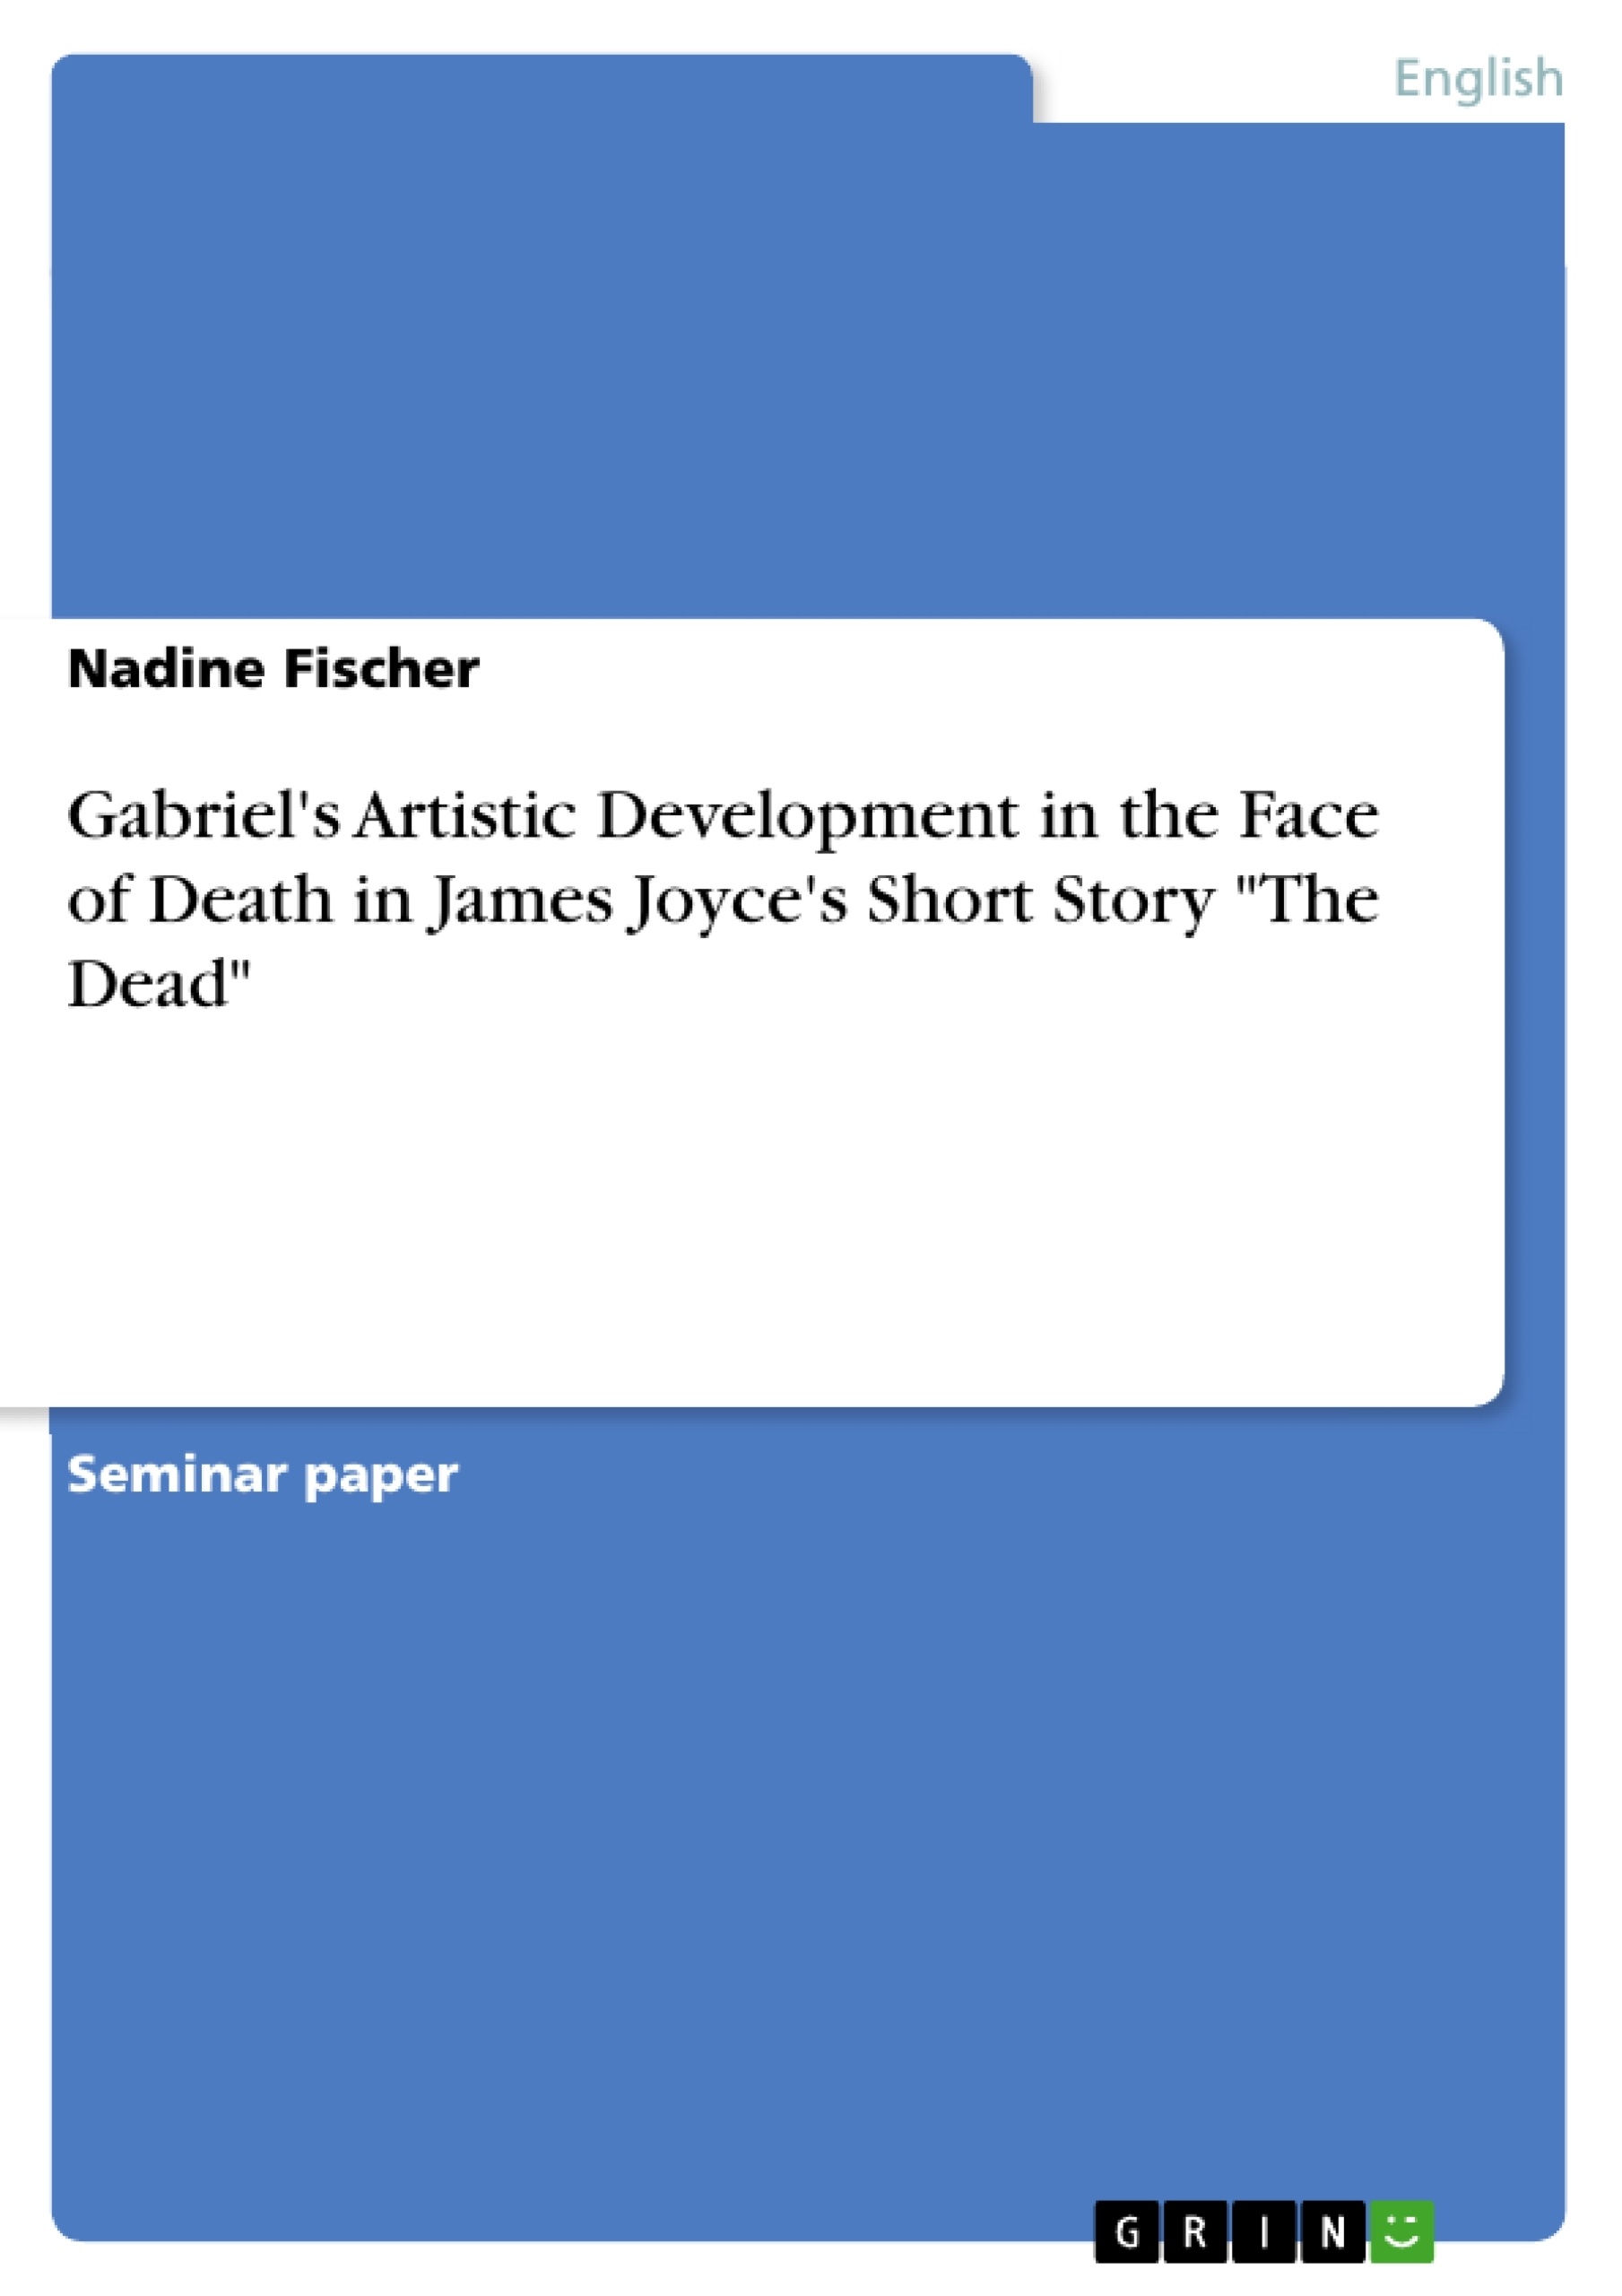 Title: Gabriel's Artistic Development in the Face of Death in James Joyce's Short Story "The Dead"